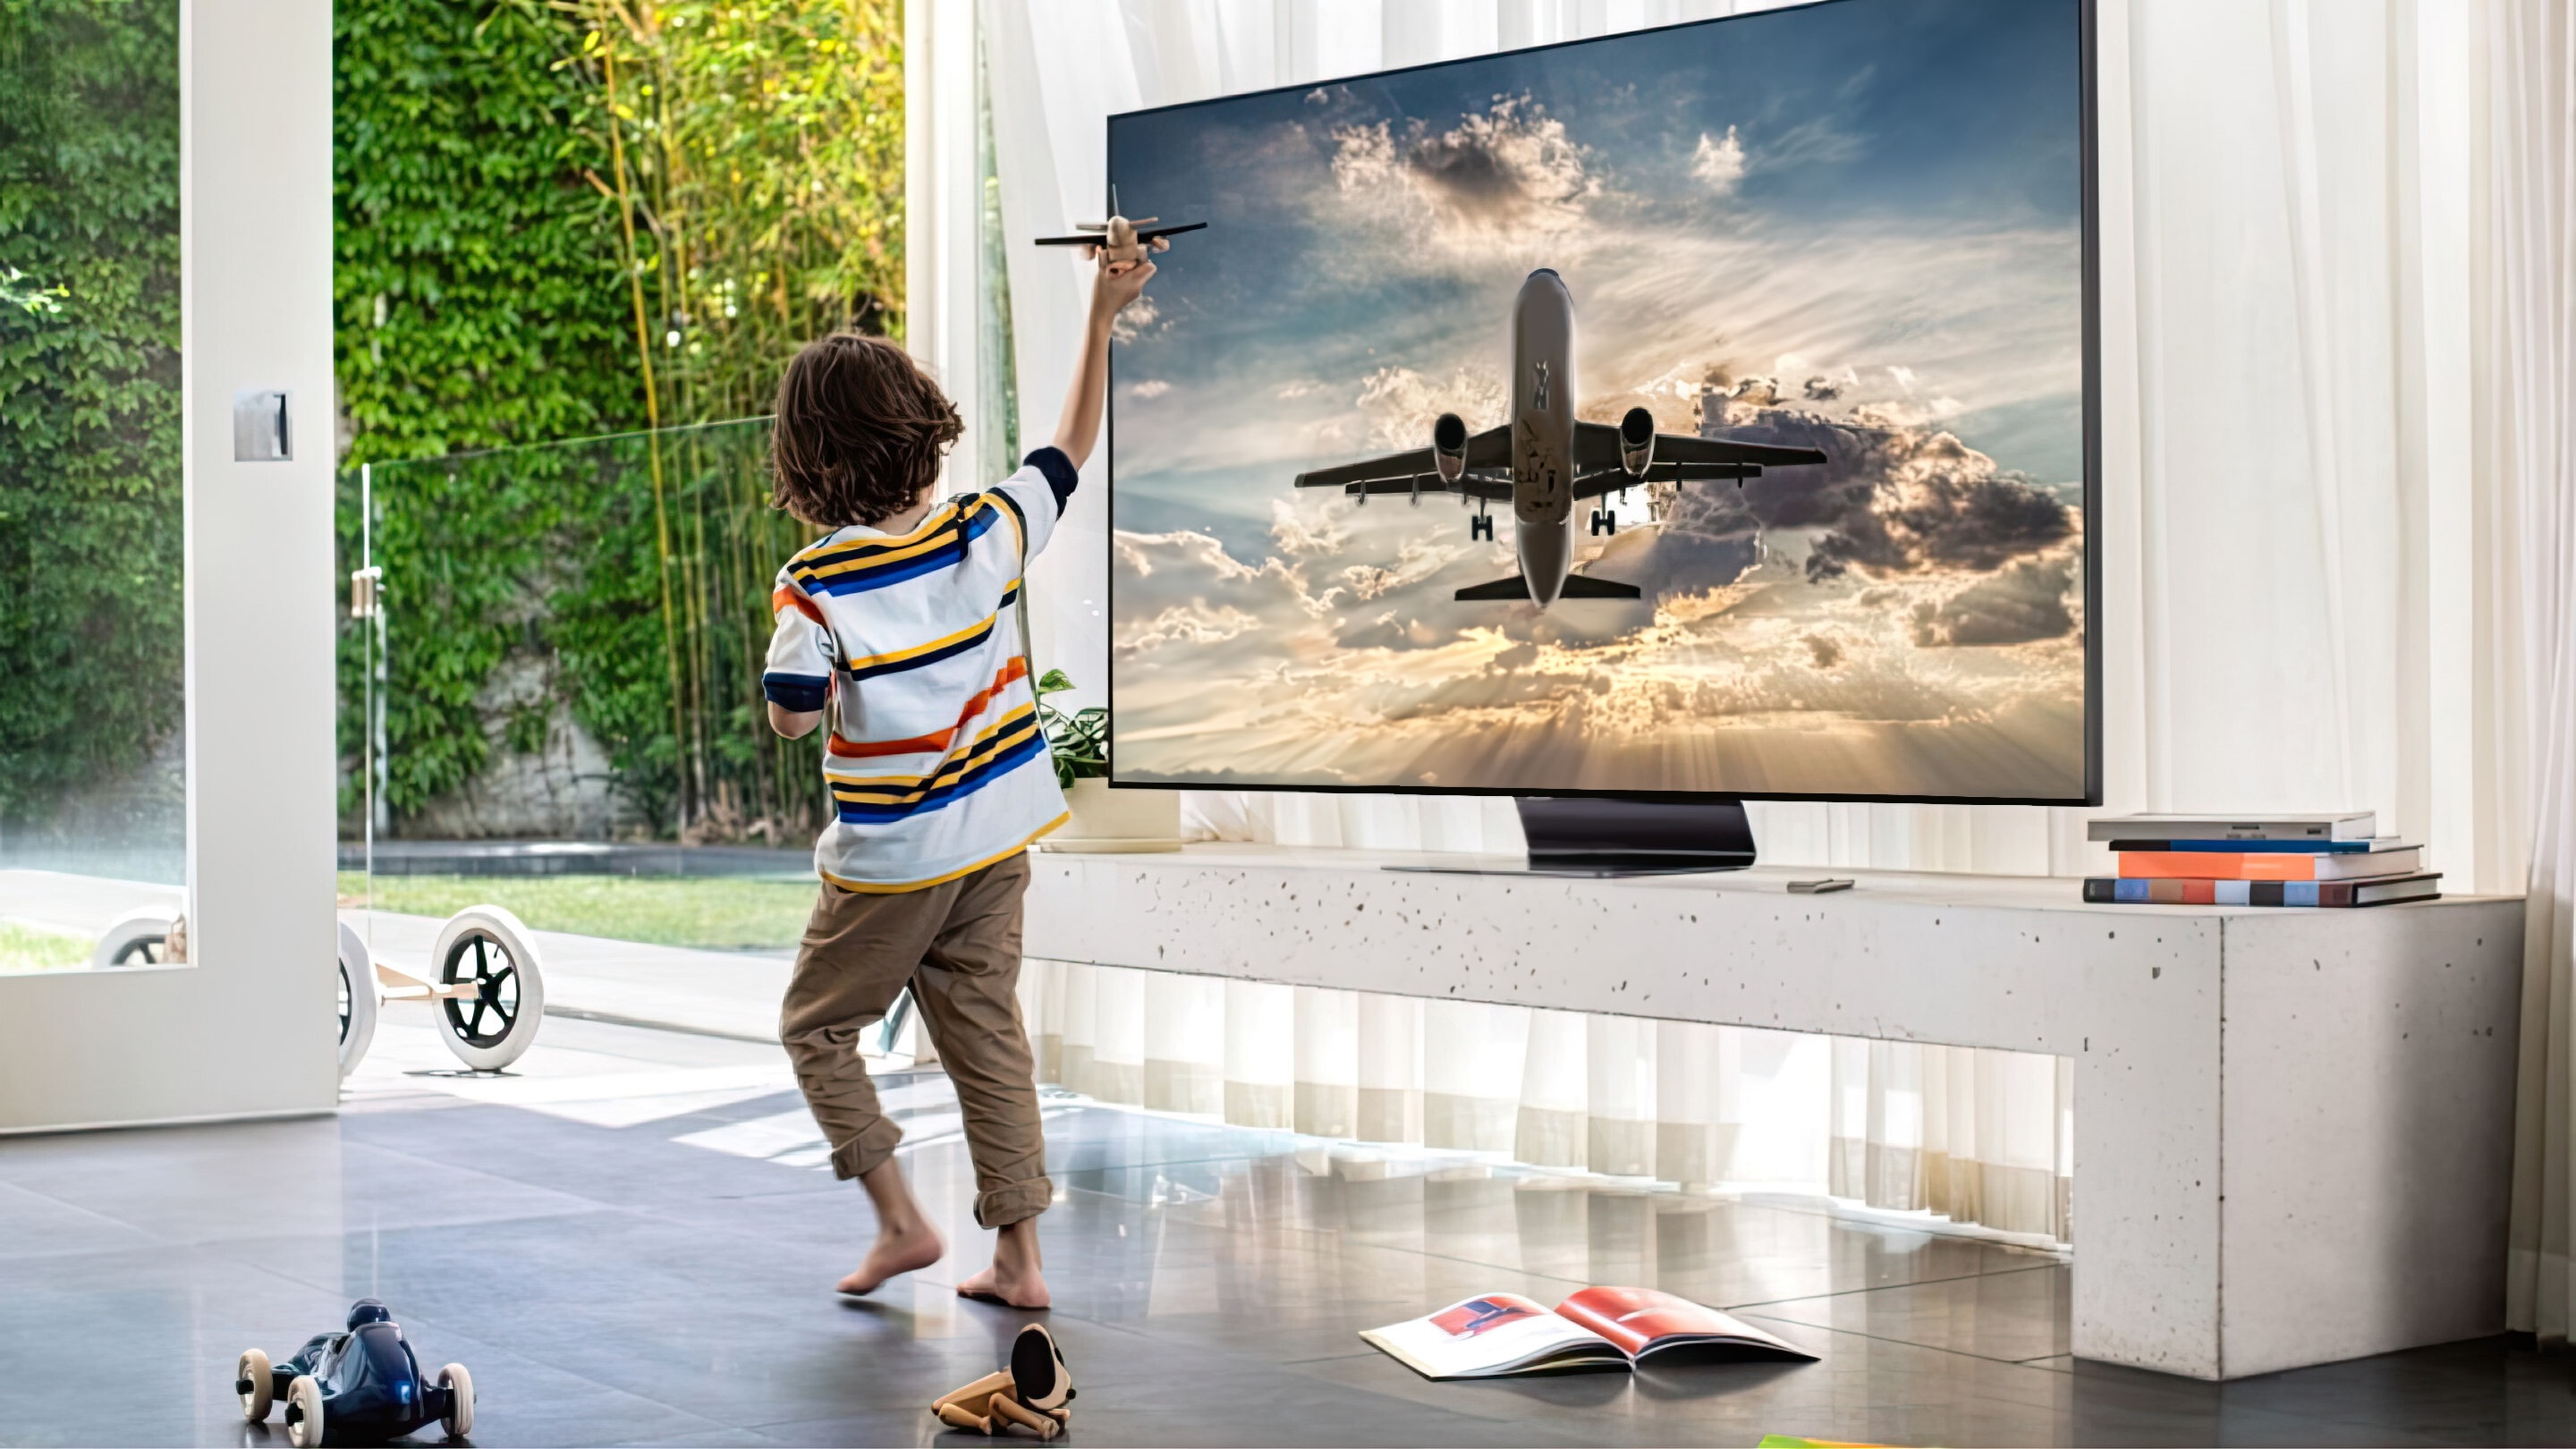 Child plays with a toy airplane in front of an image of a plane taking off